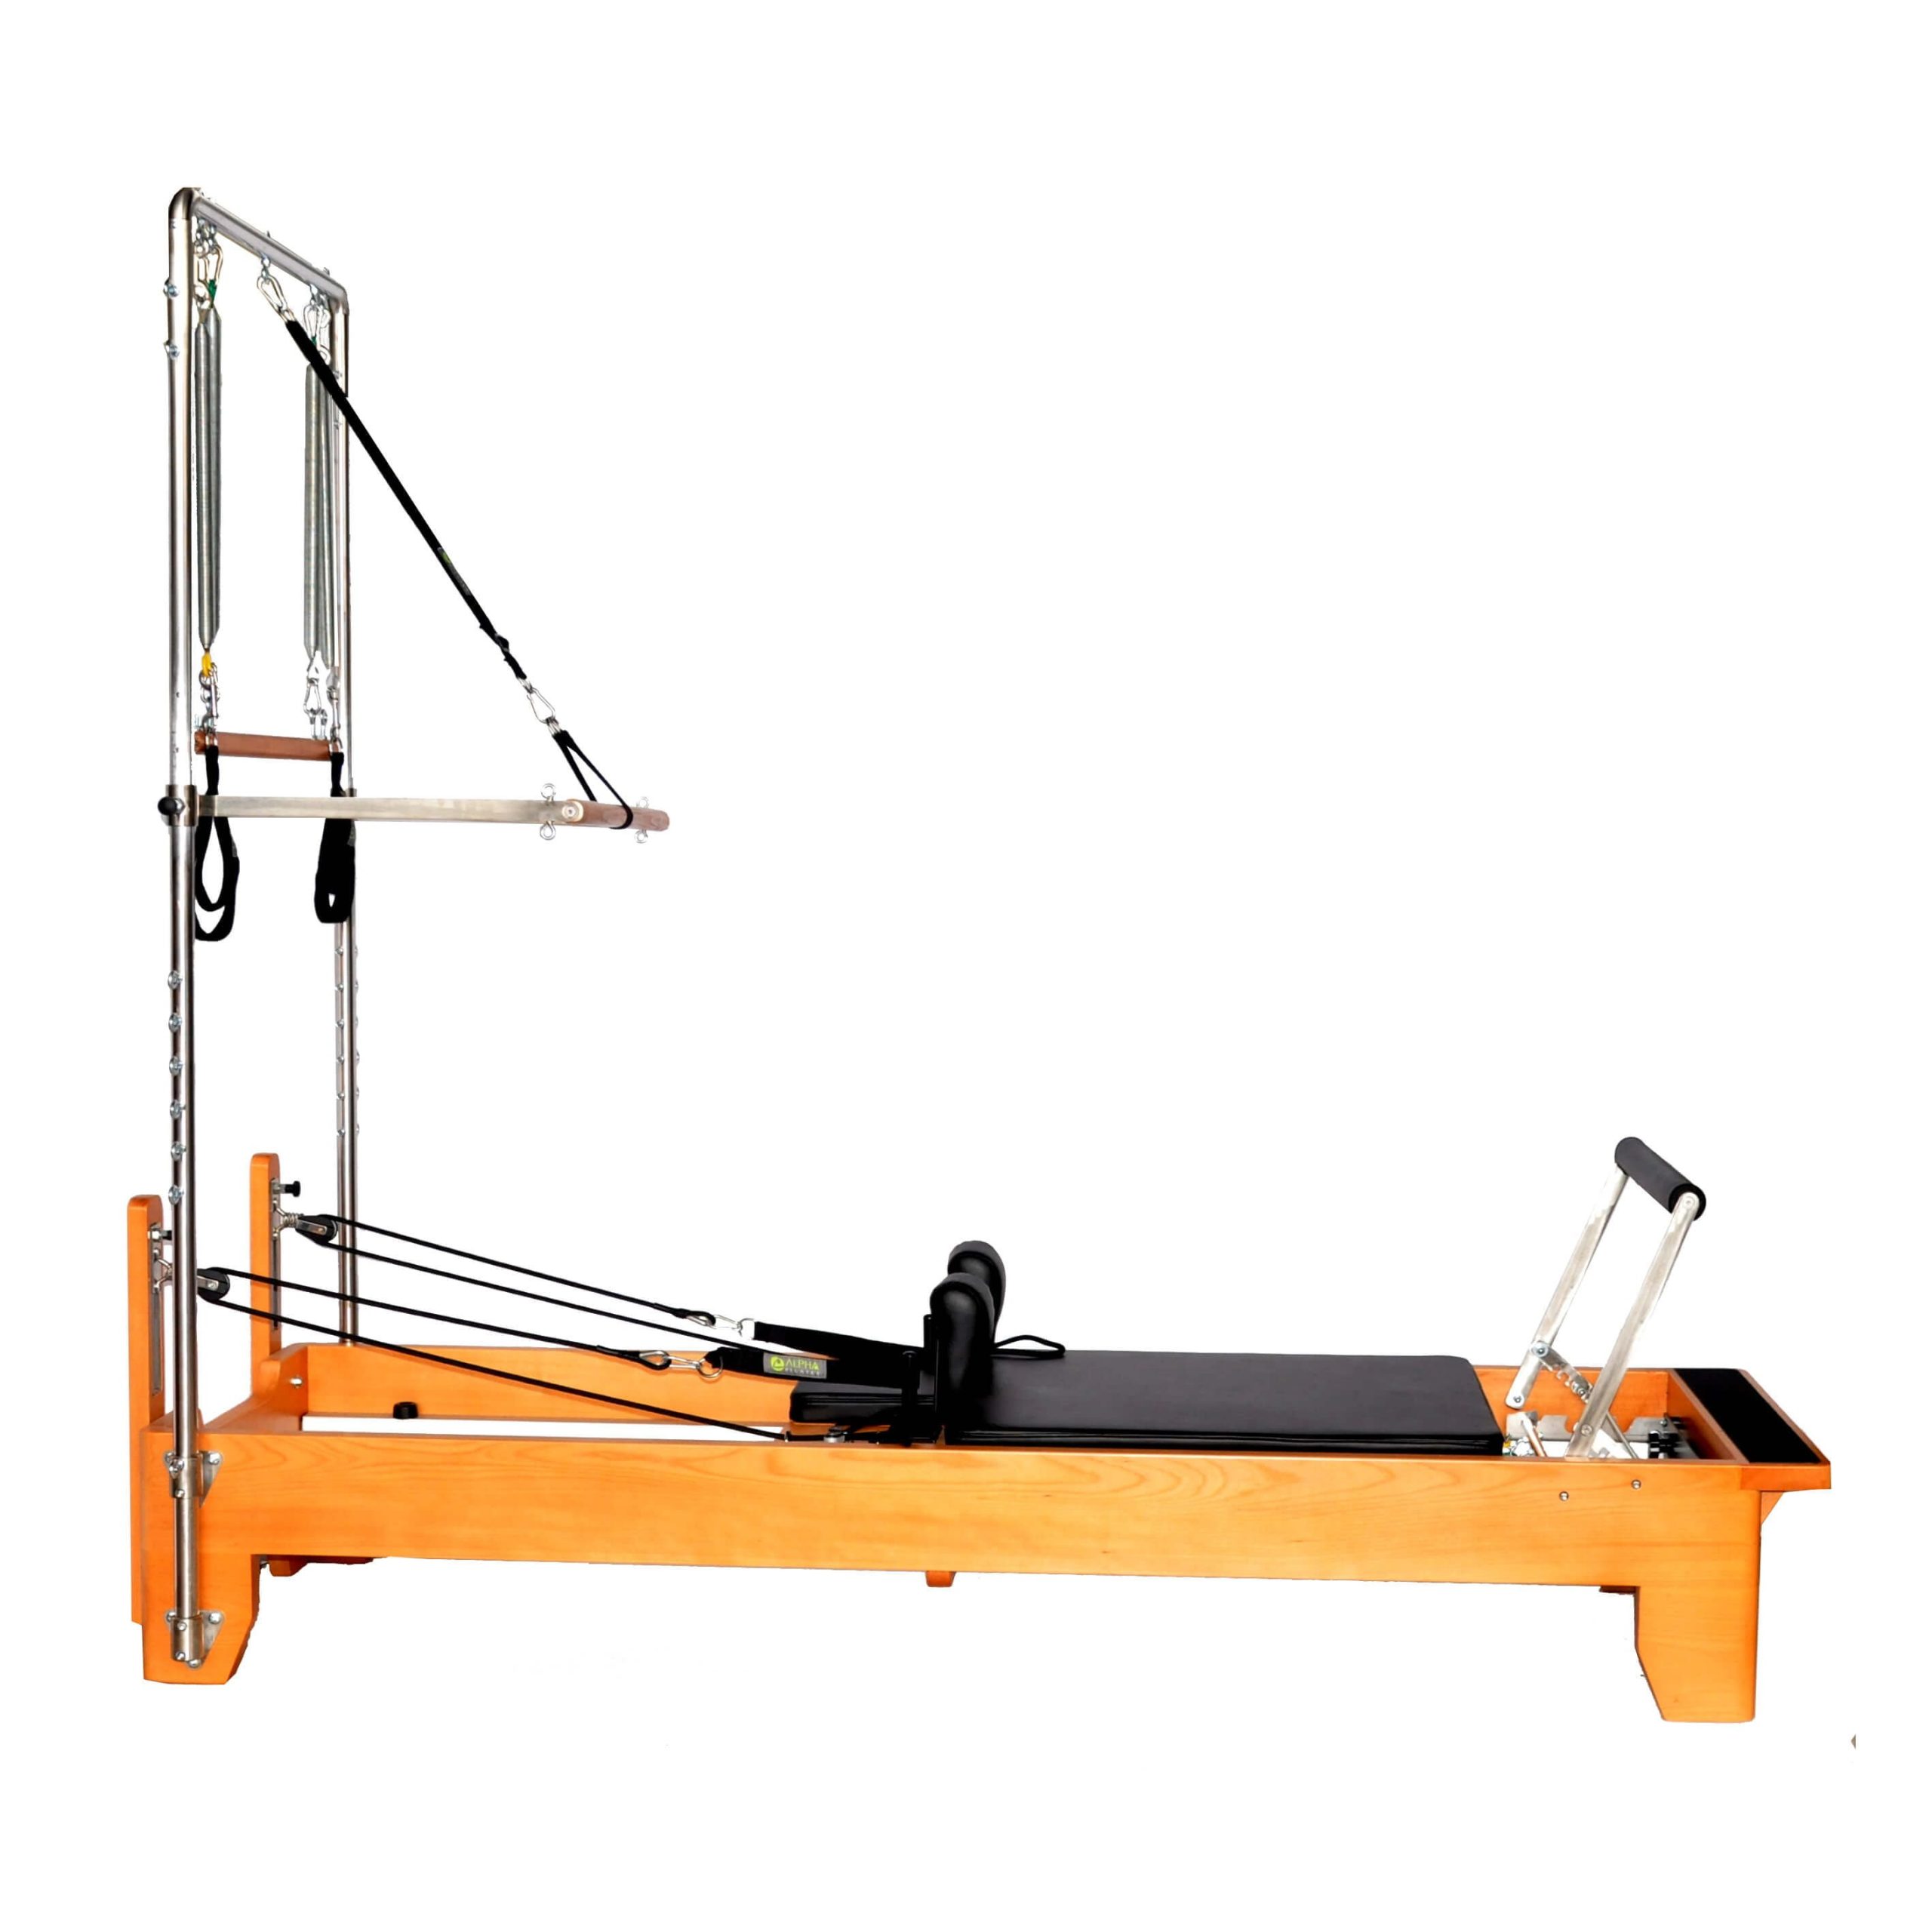 Reformer pilates machine, Hartswater, Northern Cape, South Africa, Sporting Goods - Bicycles